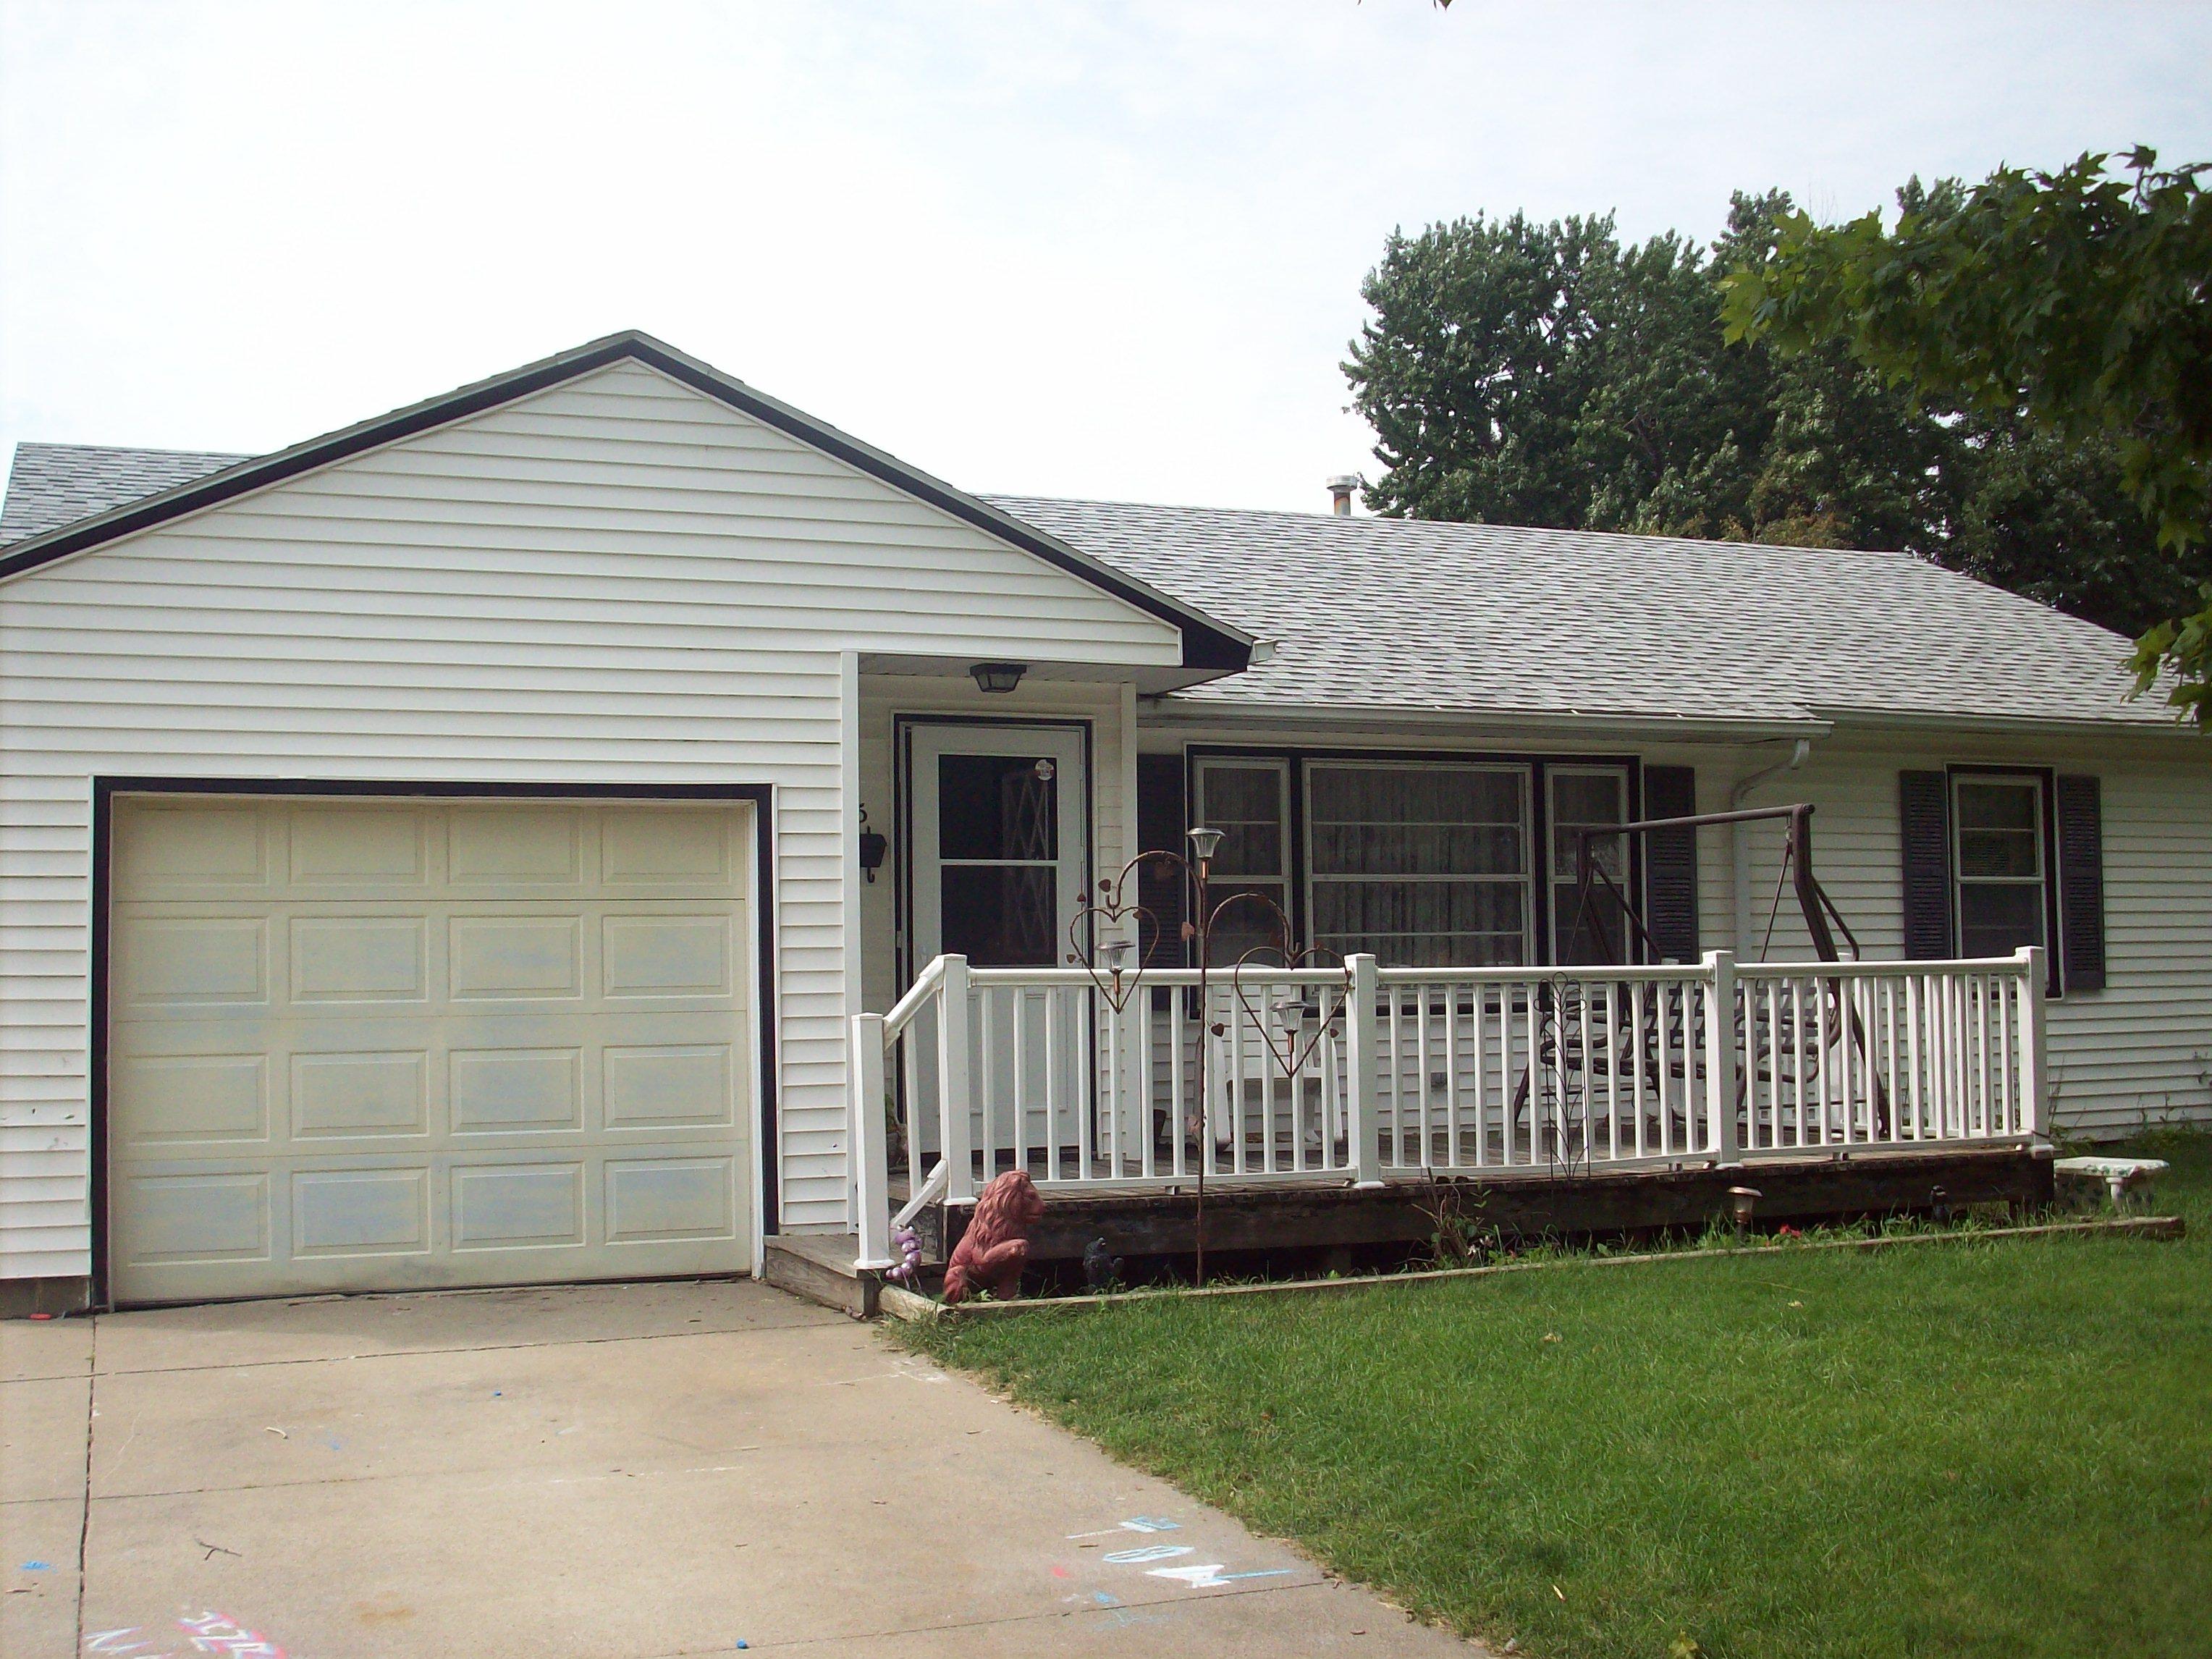 This 3 bedroom ranch home has a newer roof and newer siding. One car attached garage and a storage shed. Fenced in back yard. Laundry on main or lower level. 215 9th Ave. SE, Le Mars, Iowa. Call Jan 712-540-2669 to schedule a showing.